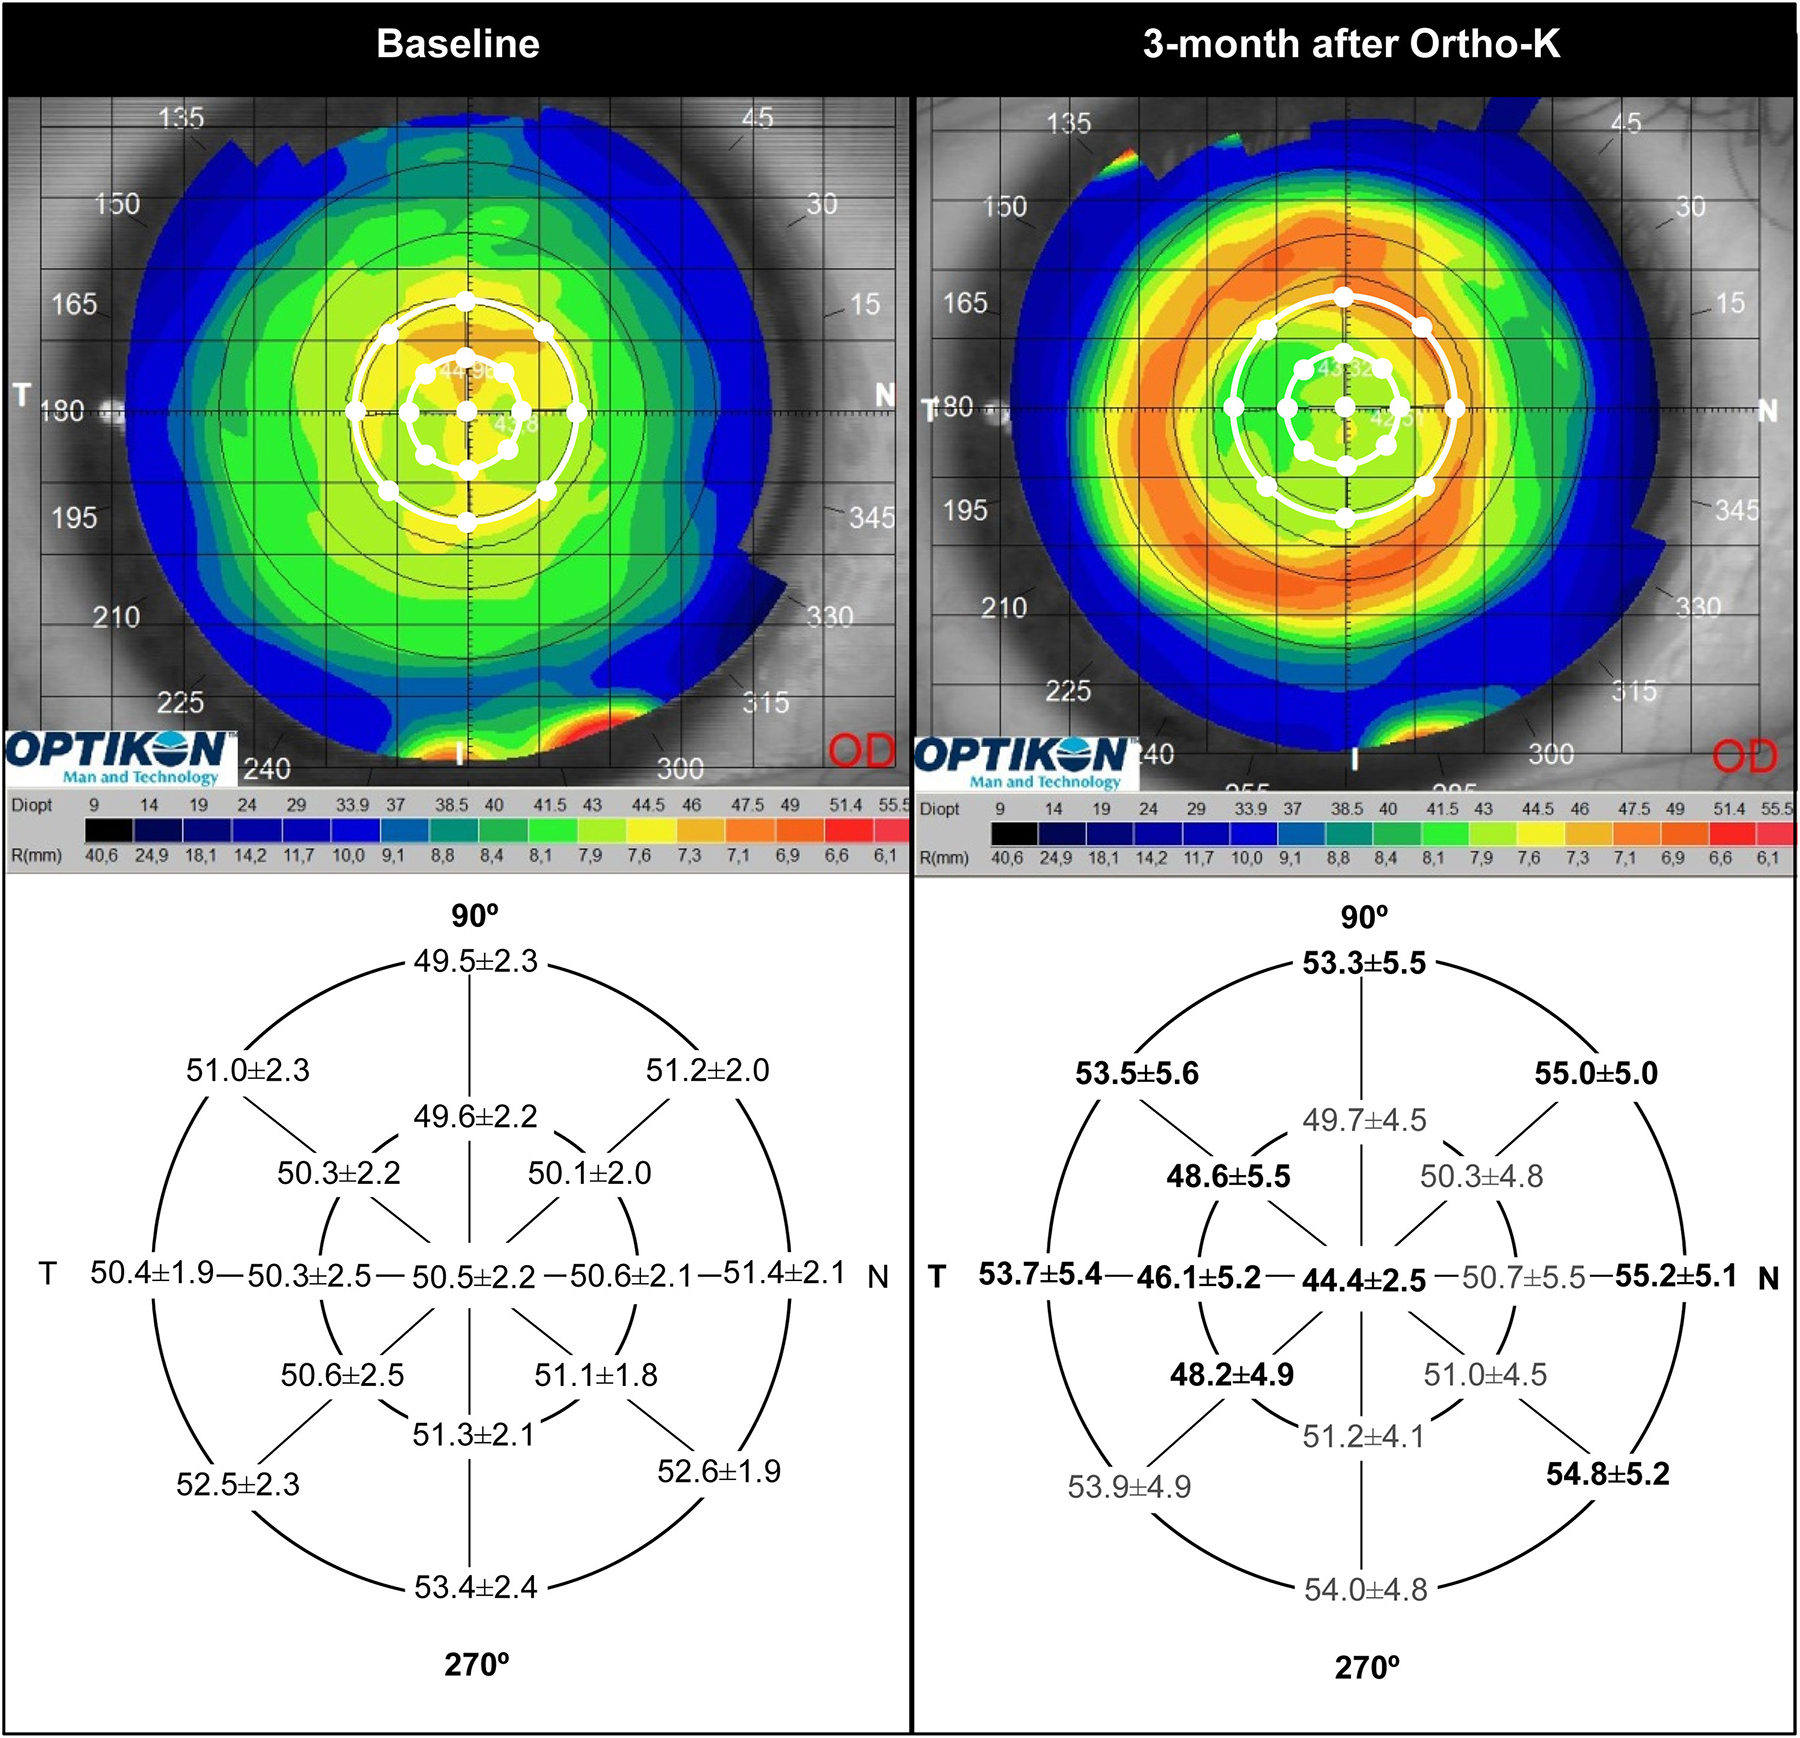 Corneal topography and epithelial thickness changes between baseline (left) and after three-month ortho-K treatment period (right). Note the stronger central and temporal epithelial thinning, and highest mid-peripheral thickening corresponding to nasal area in clear association with temporal decentration observed in this study (Figure from the study, used under Creative Commons 4.0). 